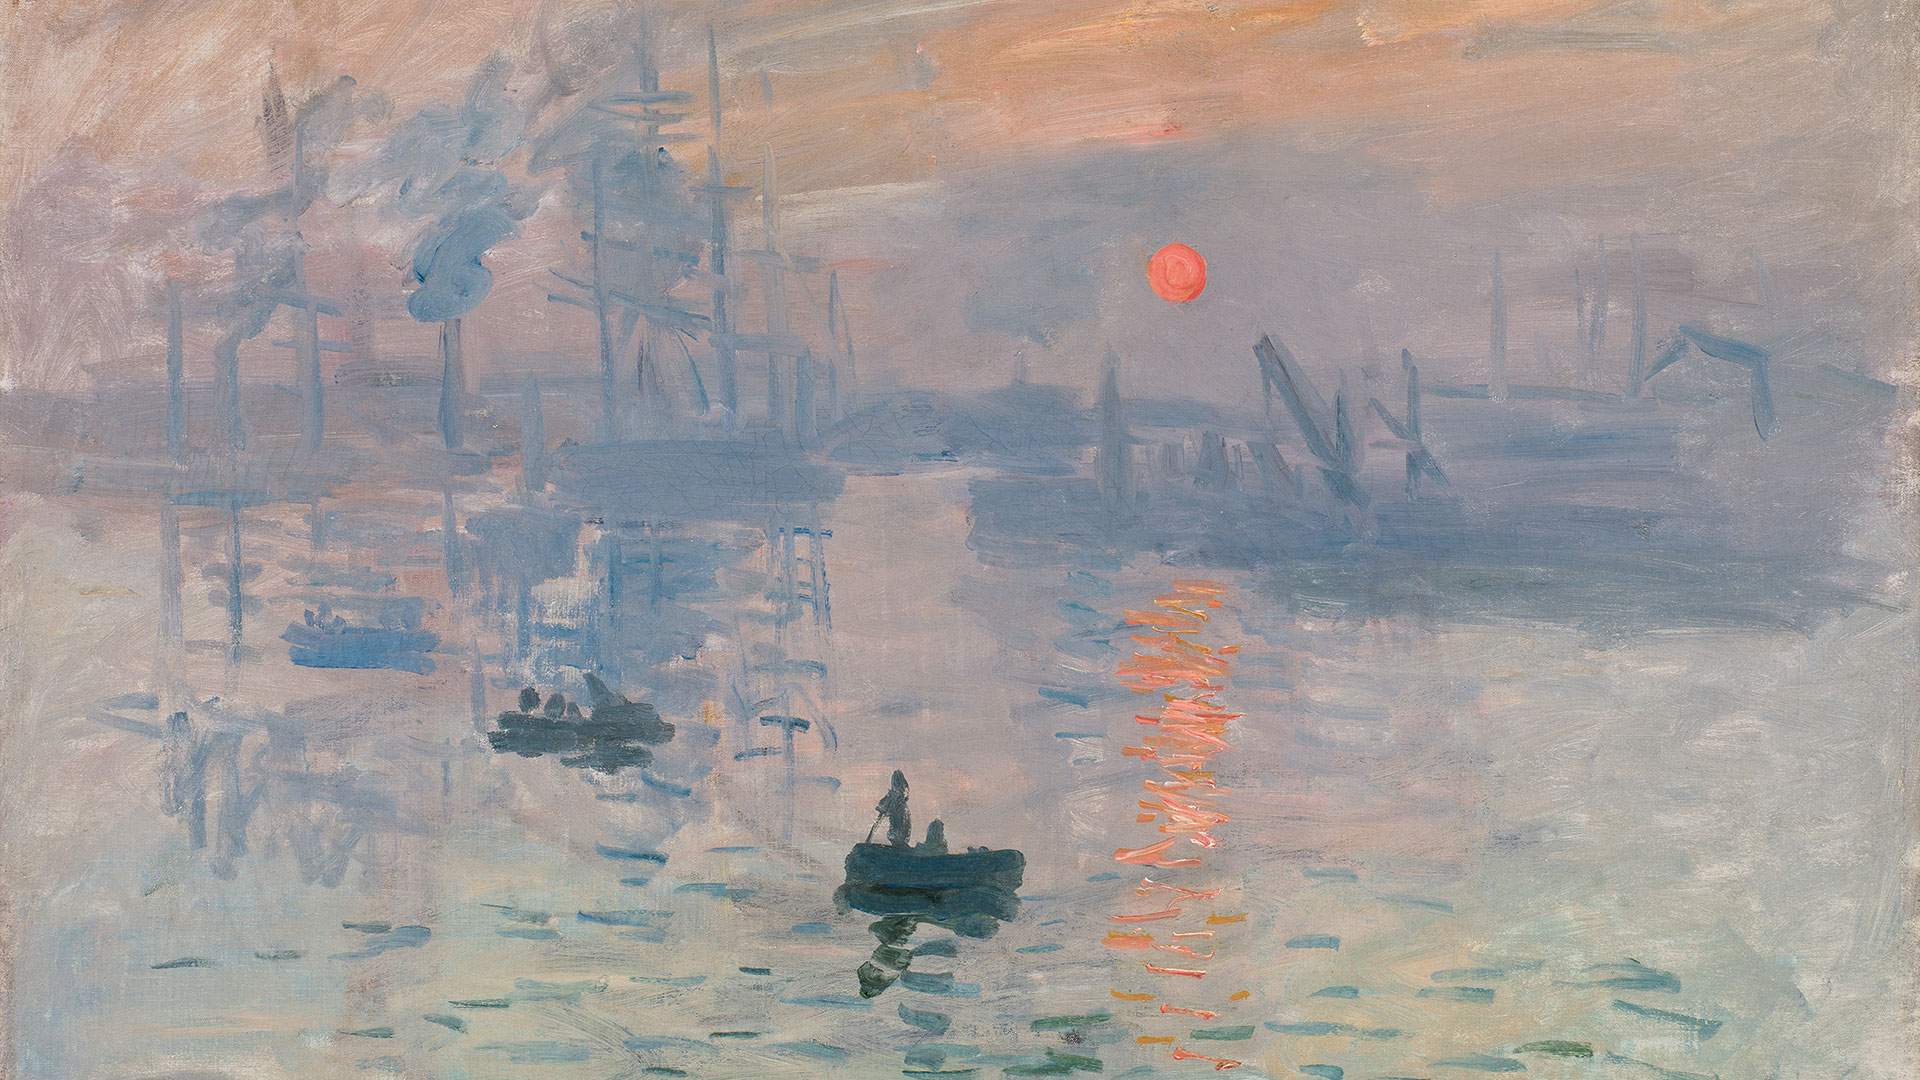 Major Monet, Matisse and Picasso Exhibitions Will Hit Australia in 2019